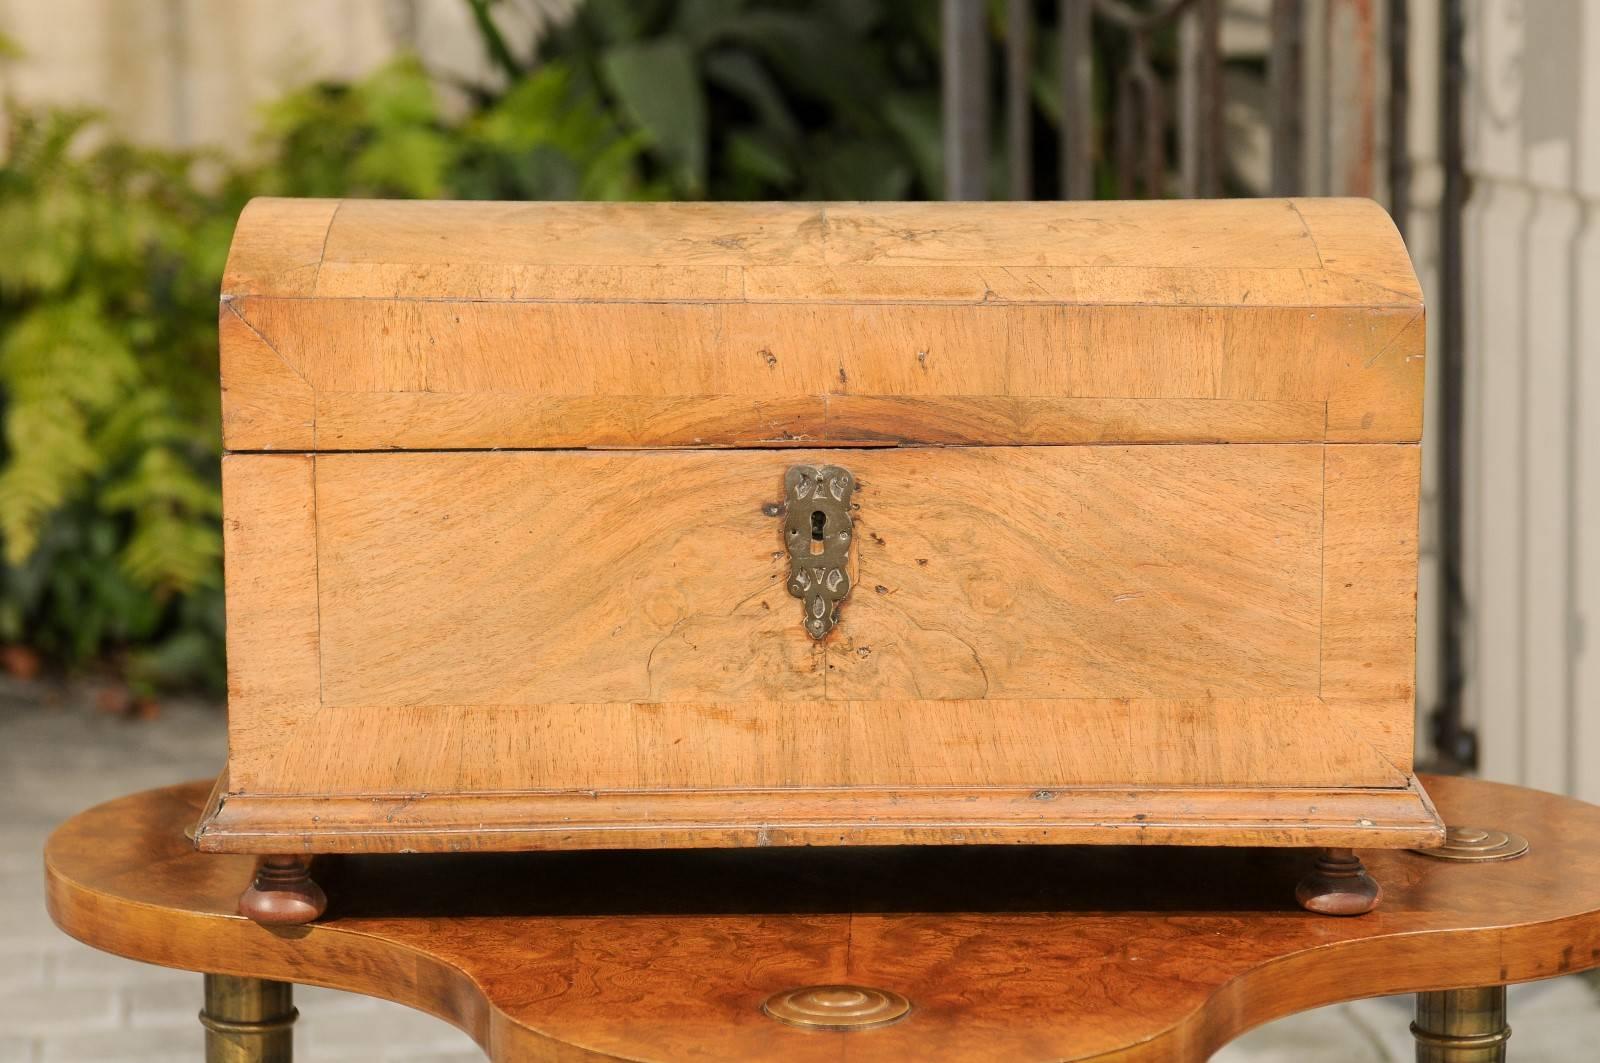 An Austrian Biedermeier decorative box made of burled walnut from the early 19th century with feet. This charming box features a burled walnut body adorned with a crossbanded inlay, creating a subtle visual contrast. The arched lid opens to reveal a